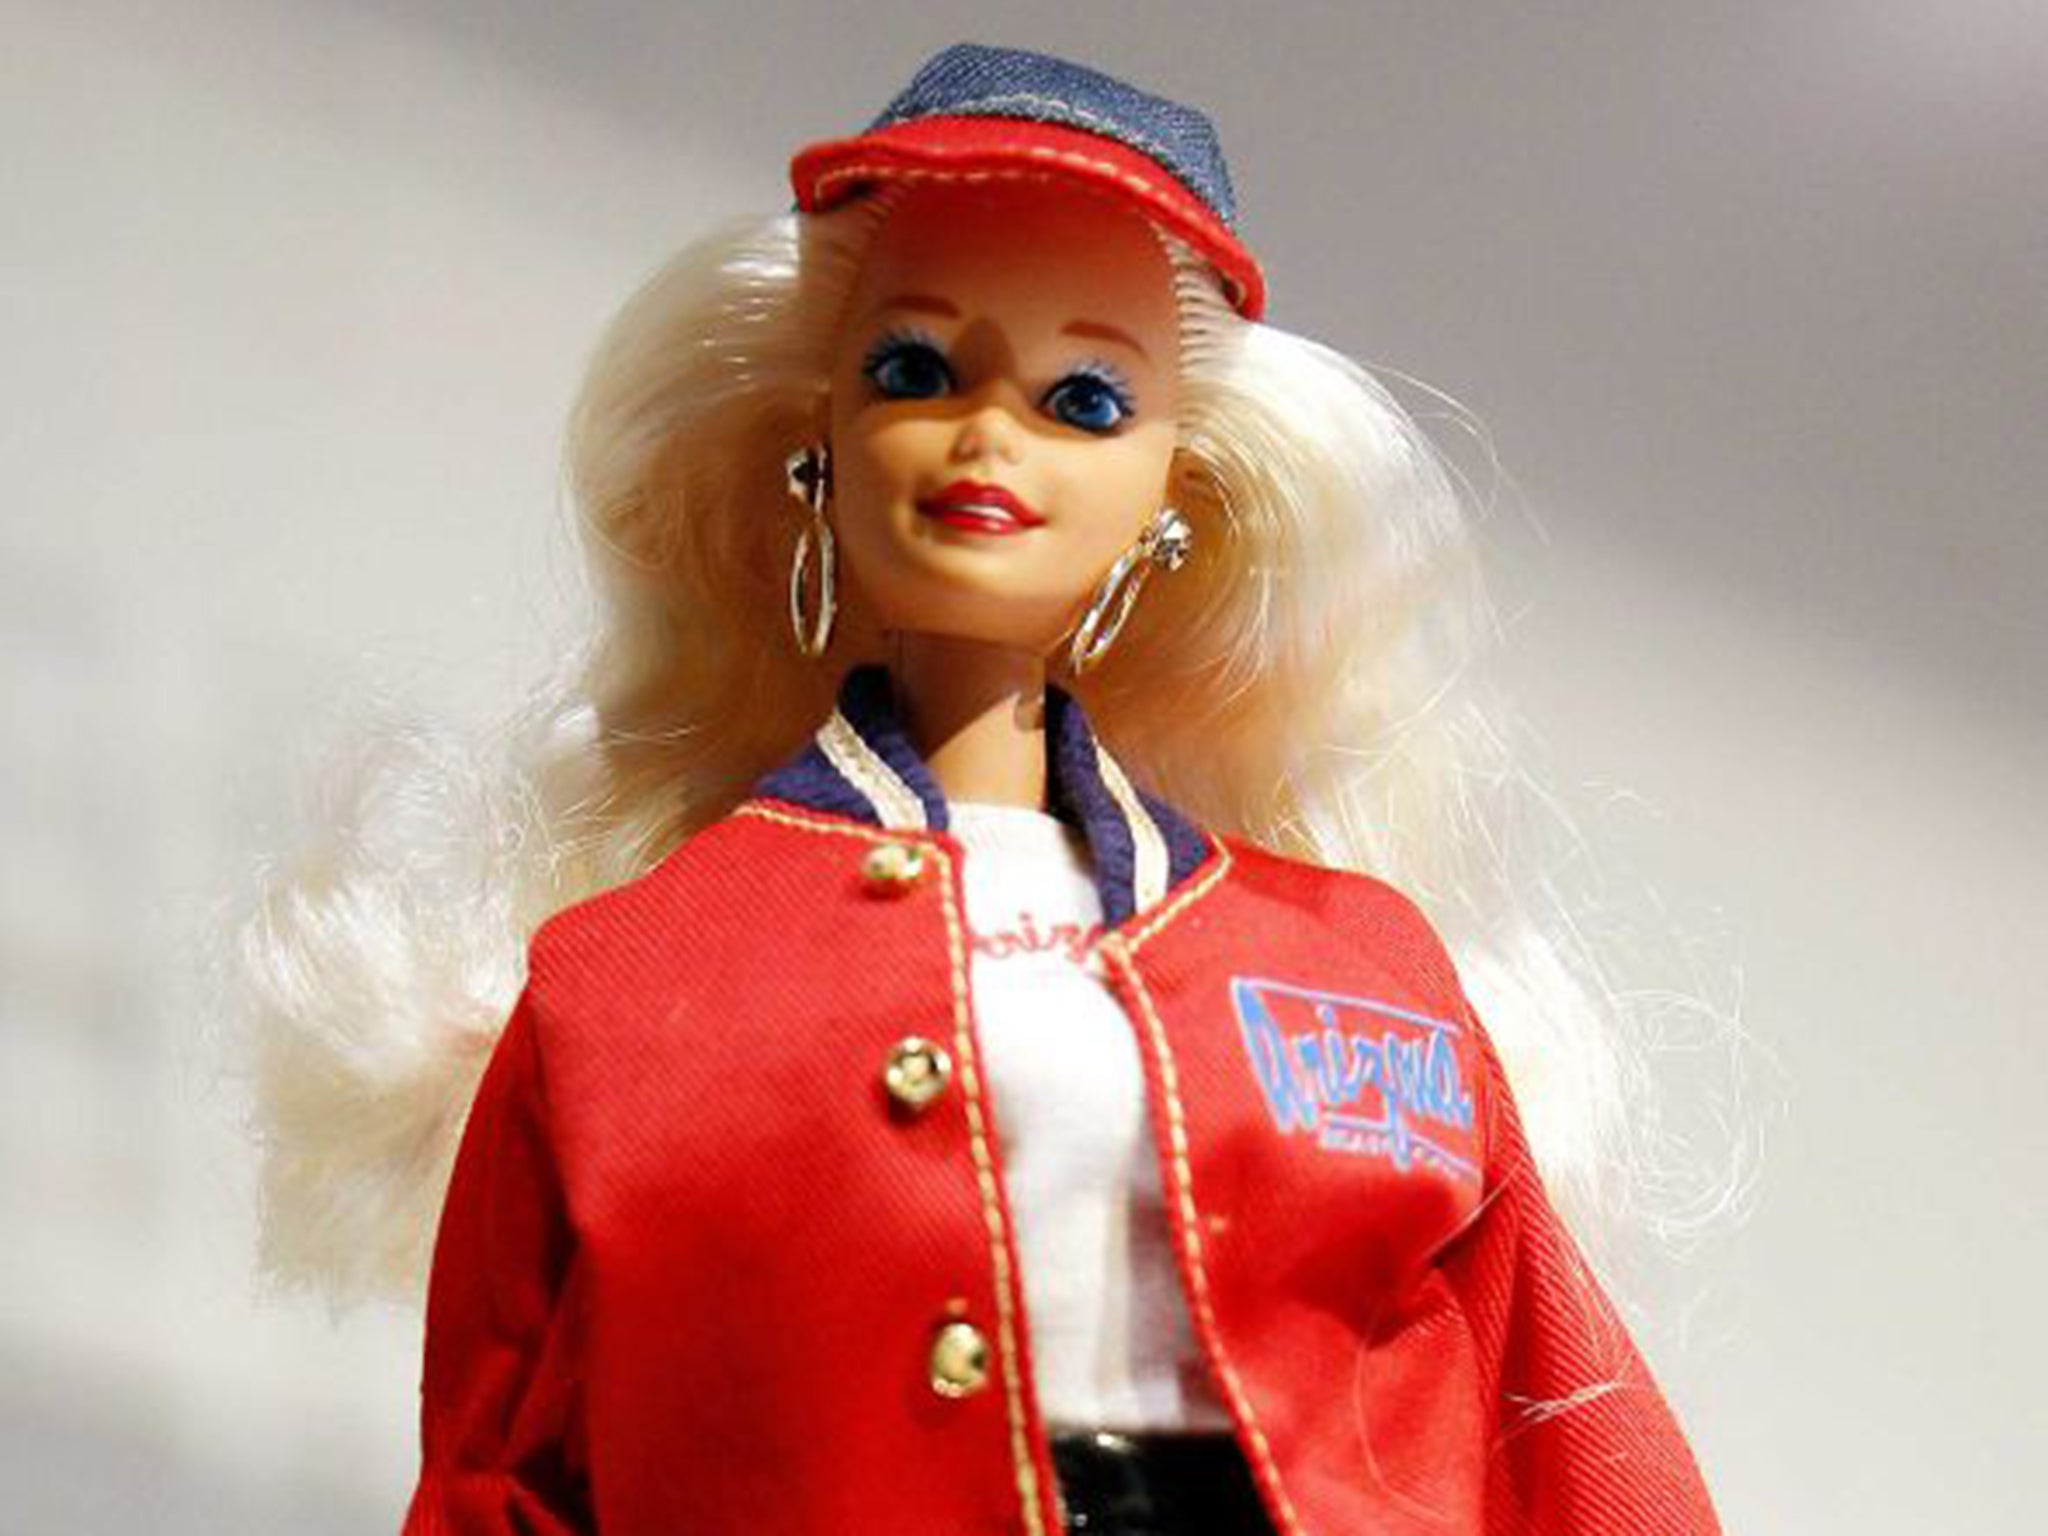 Vintage Barbie dolls could be a source of heavy-metal poisoning